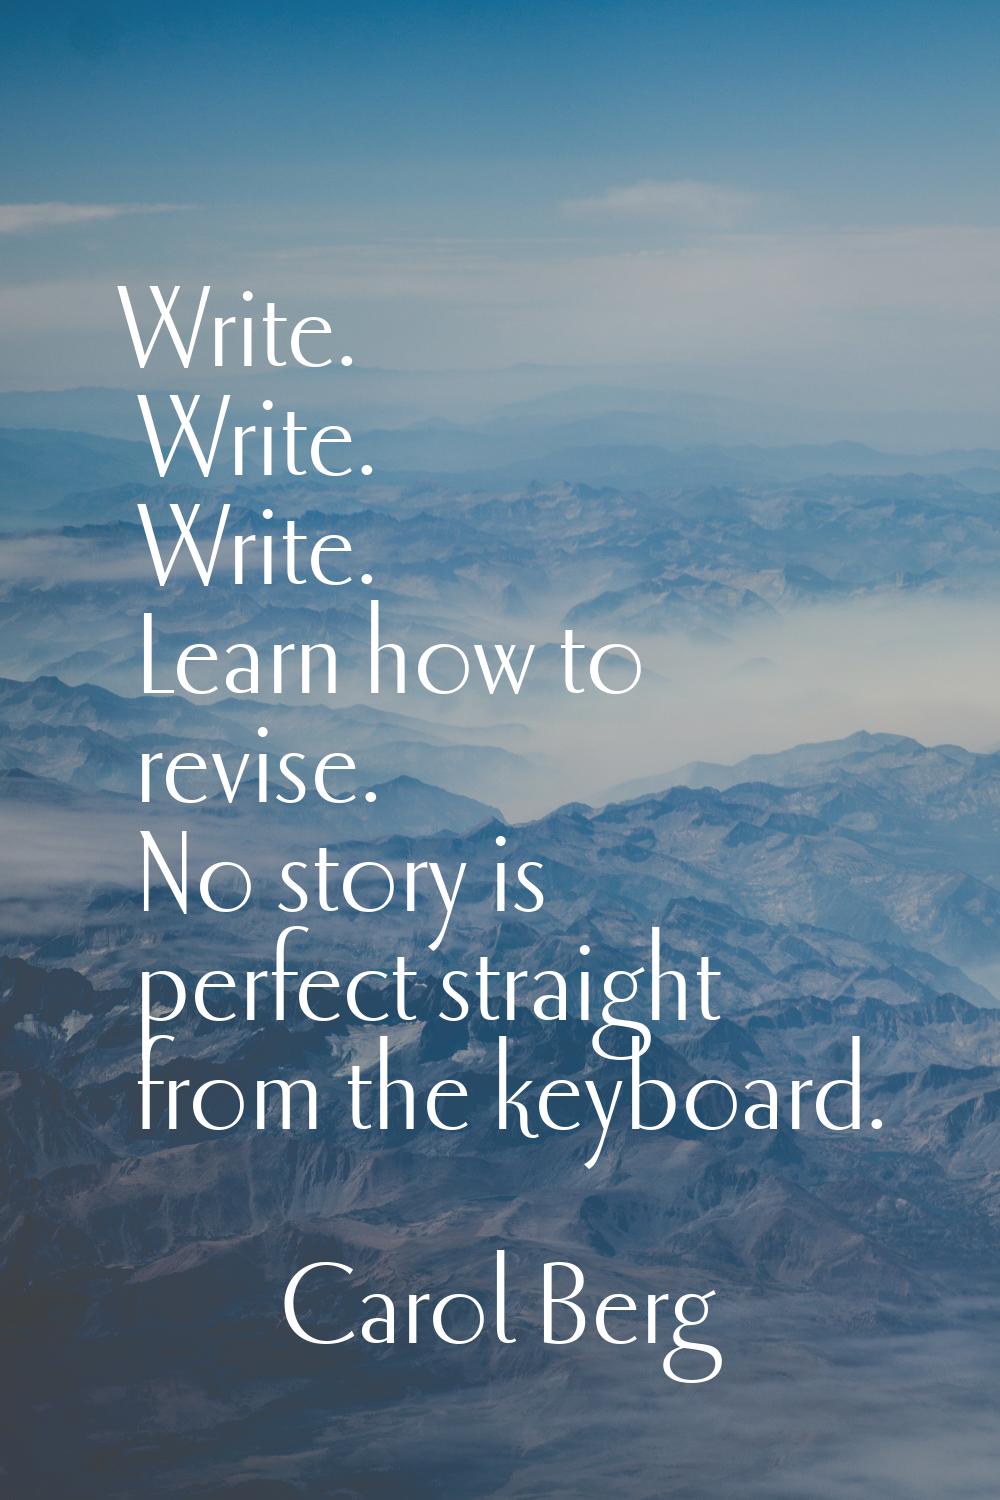 Write. Write. Write. Learn how to revise. No story is perfect straight from the keyboard.